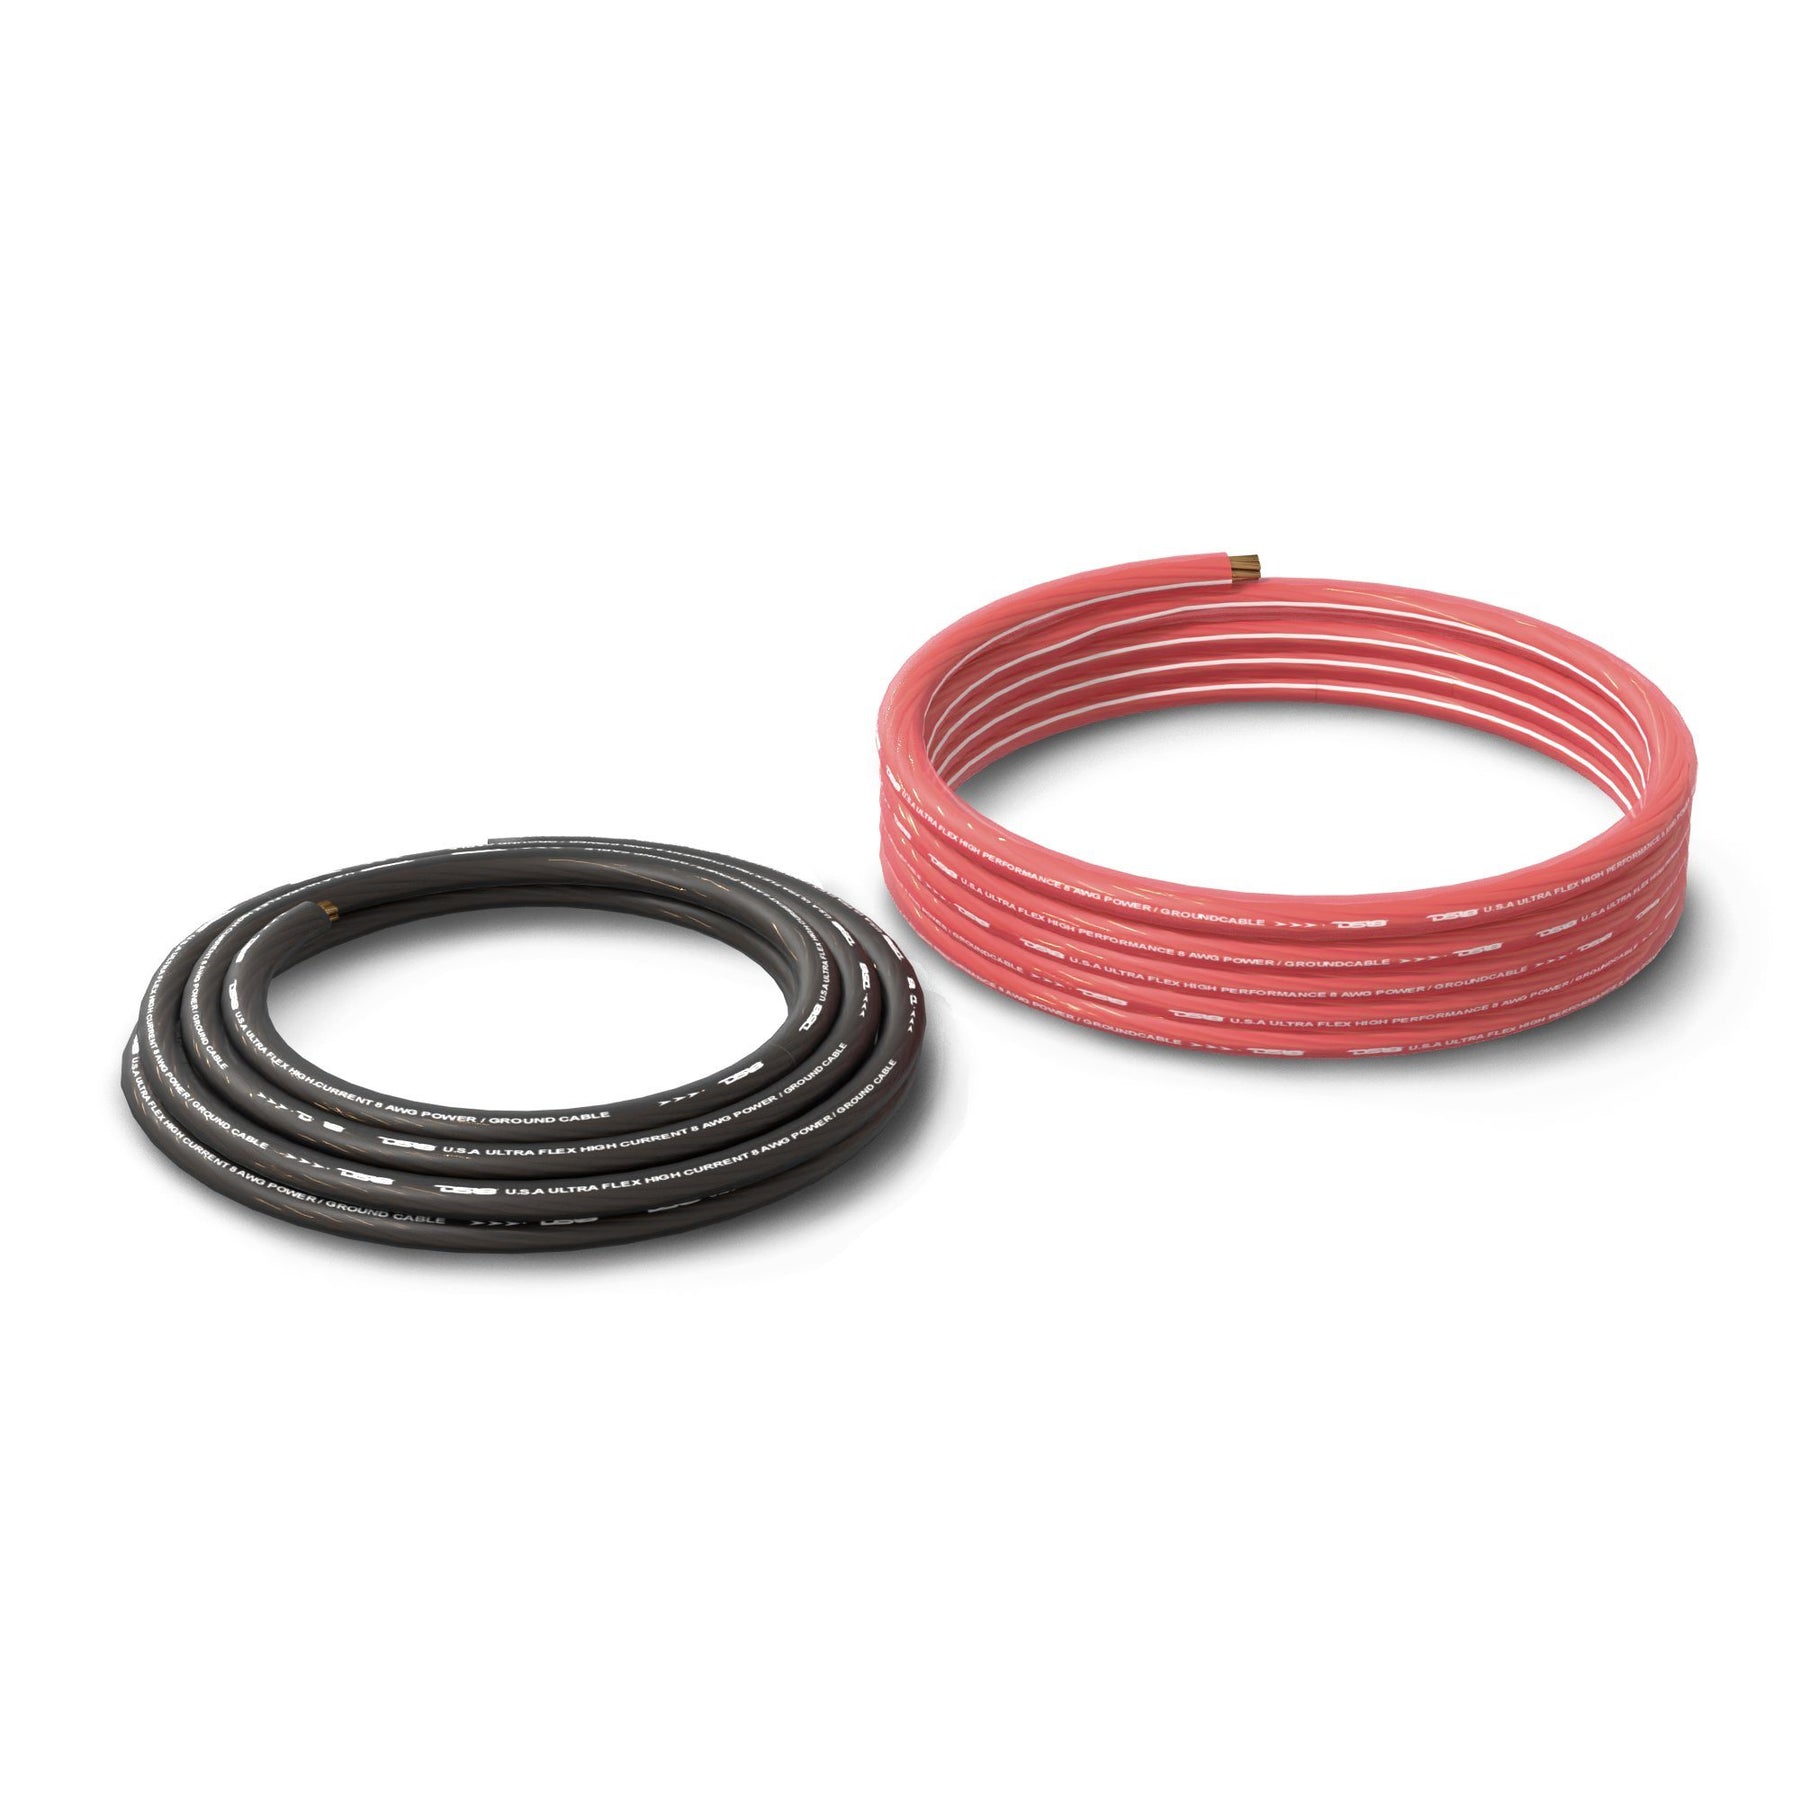 DS18 8-GA Ultra Flex OFC Ground Power Cable 5 Ft Black and 20 Ft Red Kit